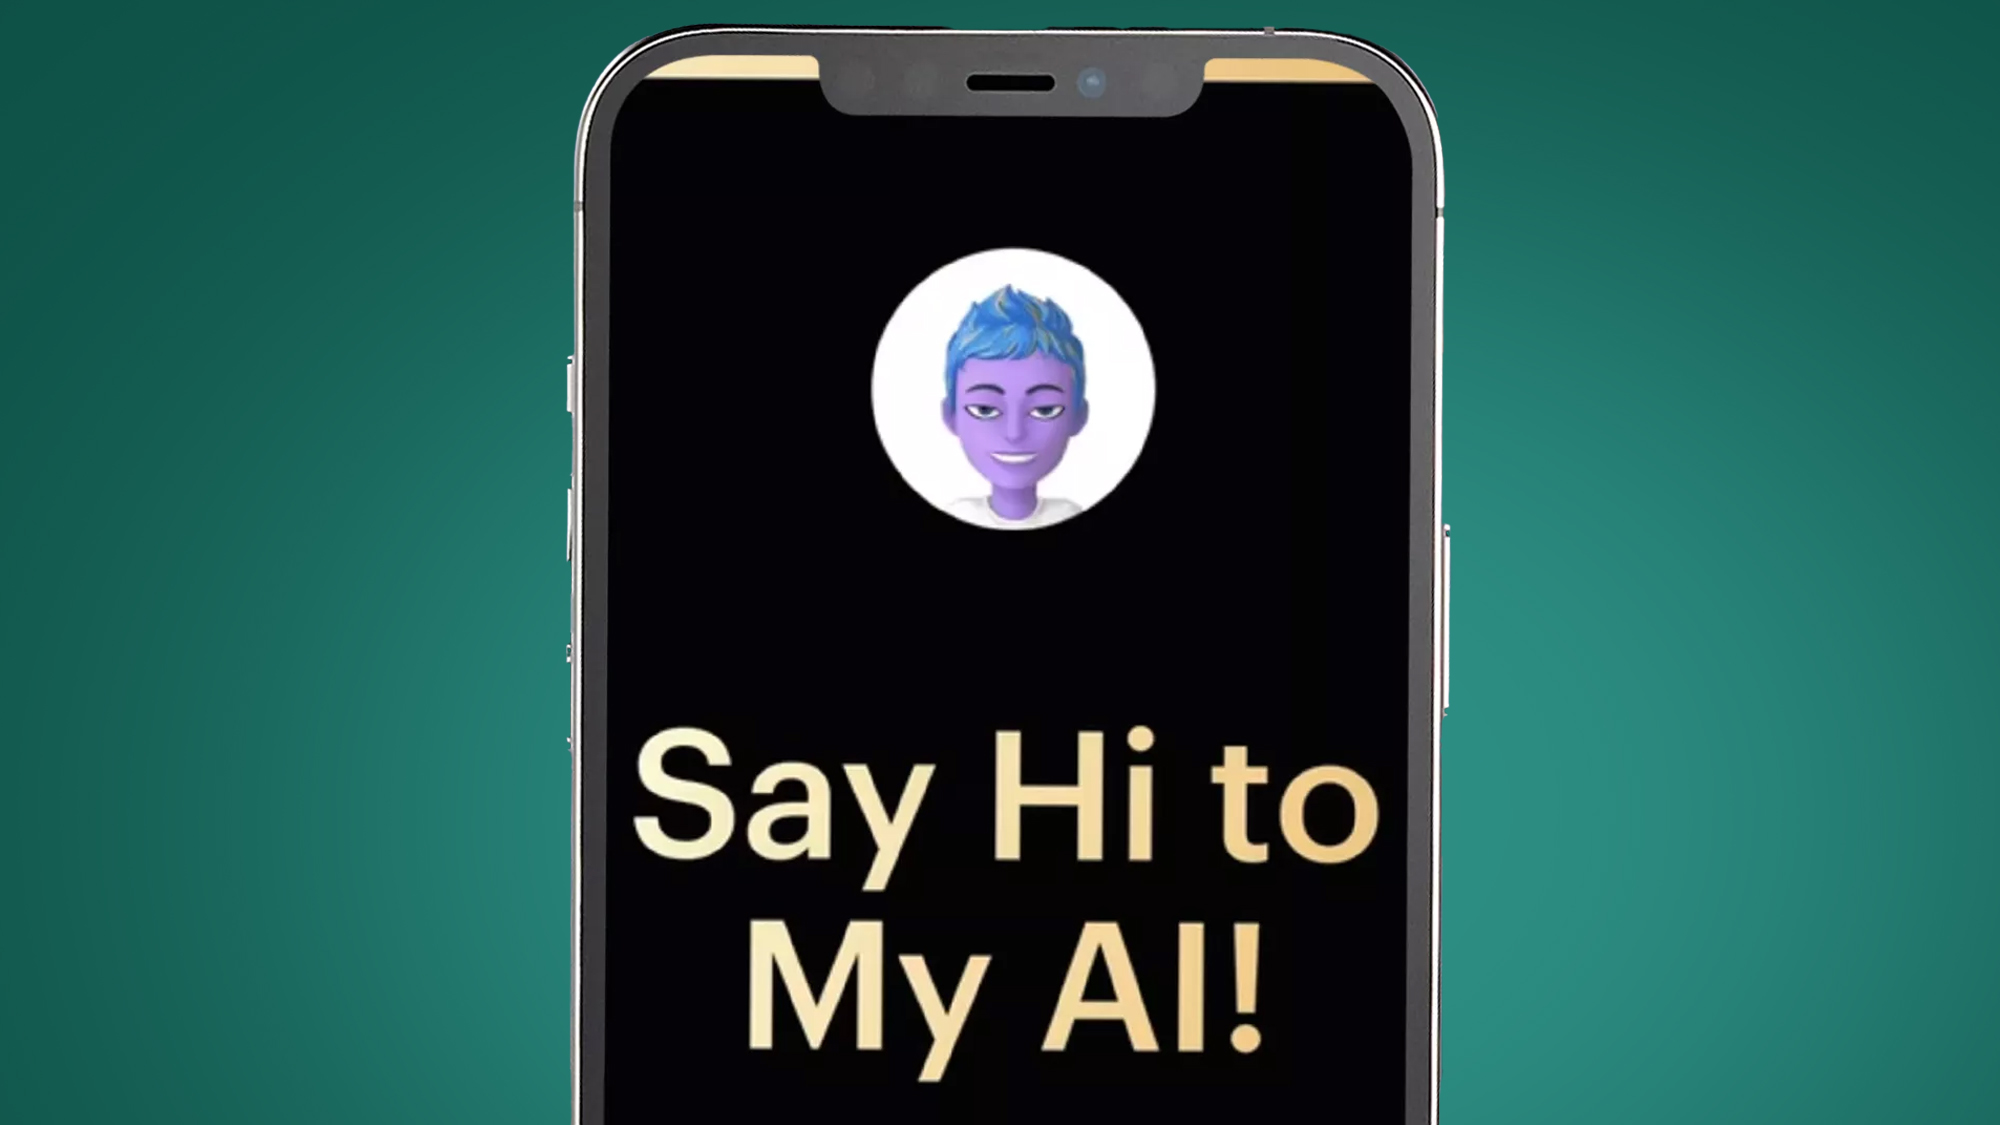 A phone screen showing Snapchat's My AI chatbot